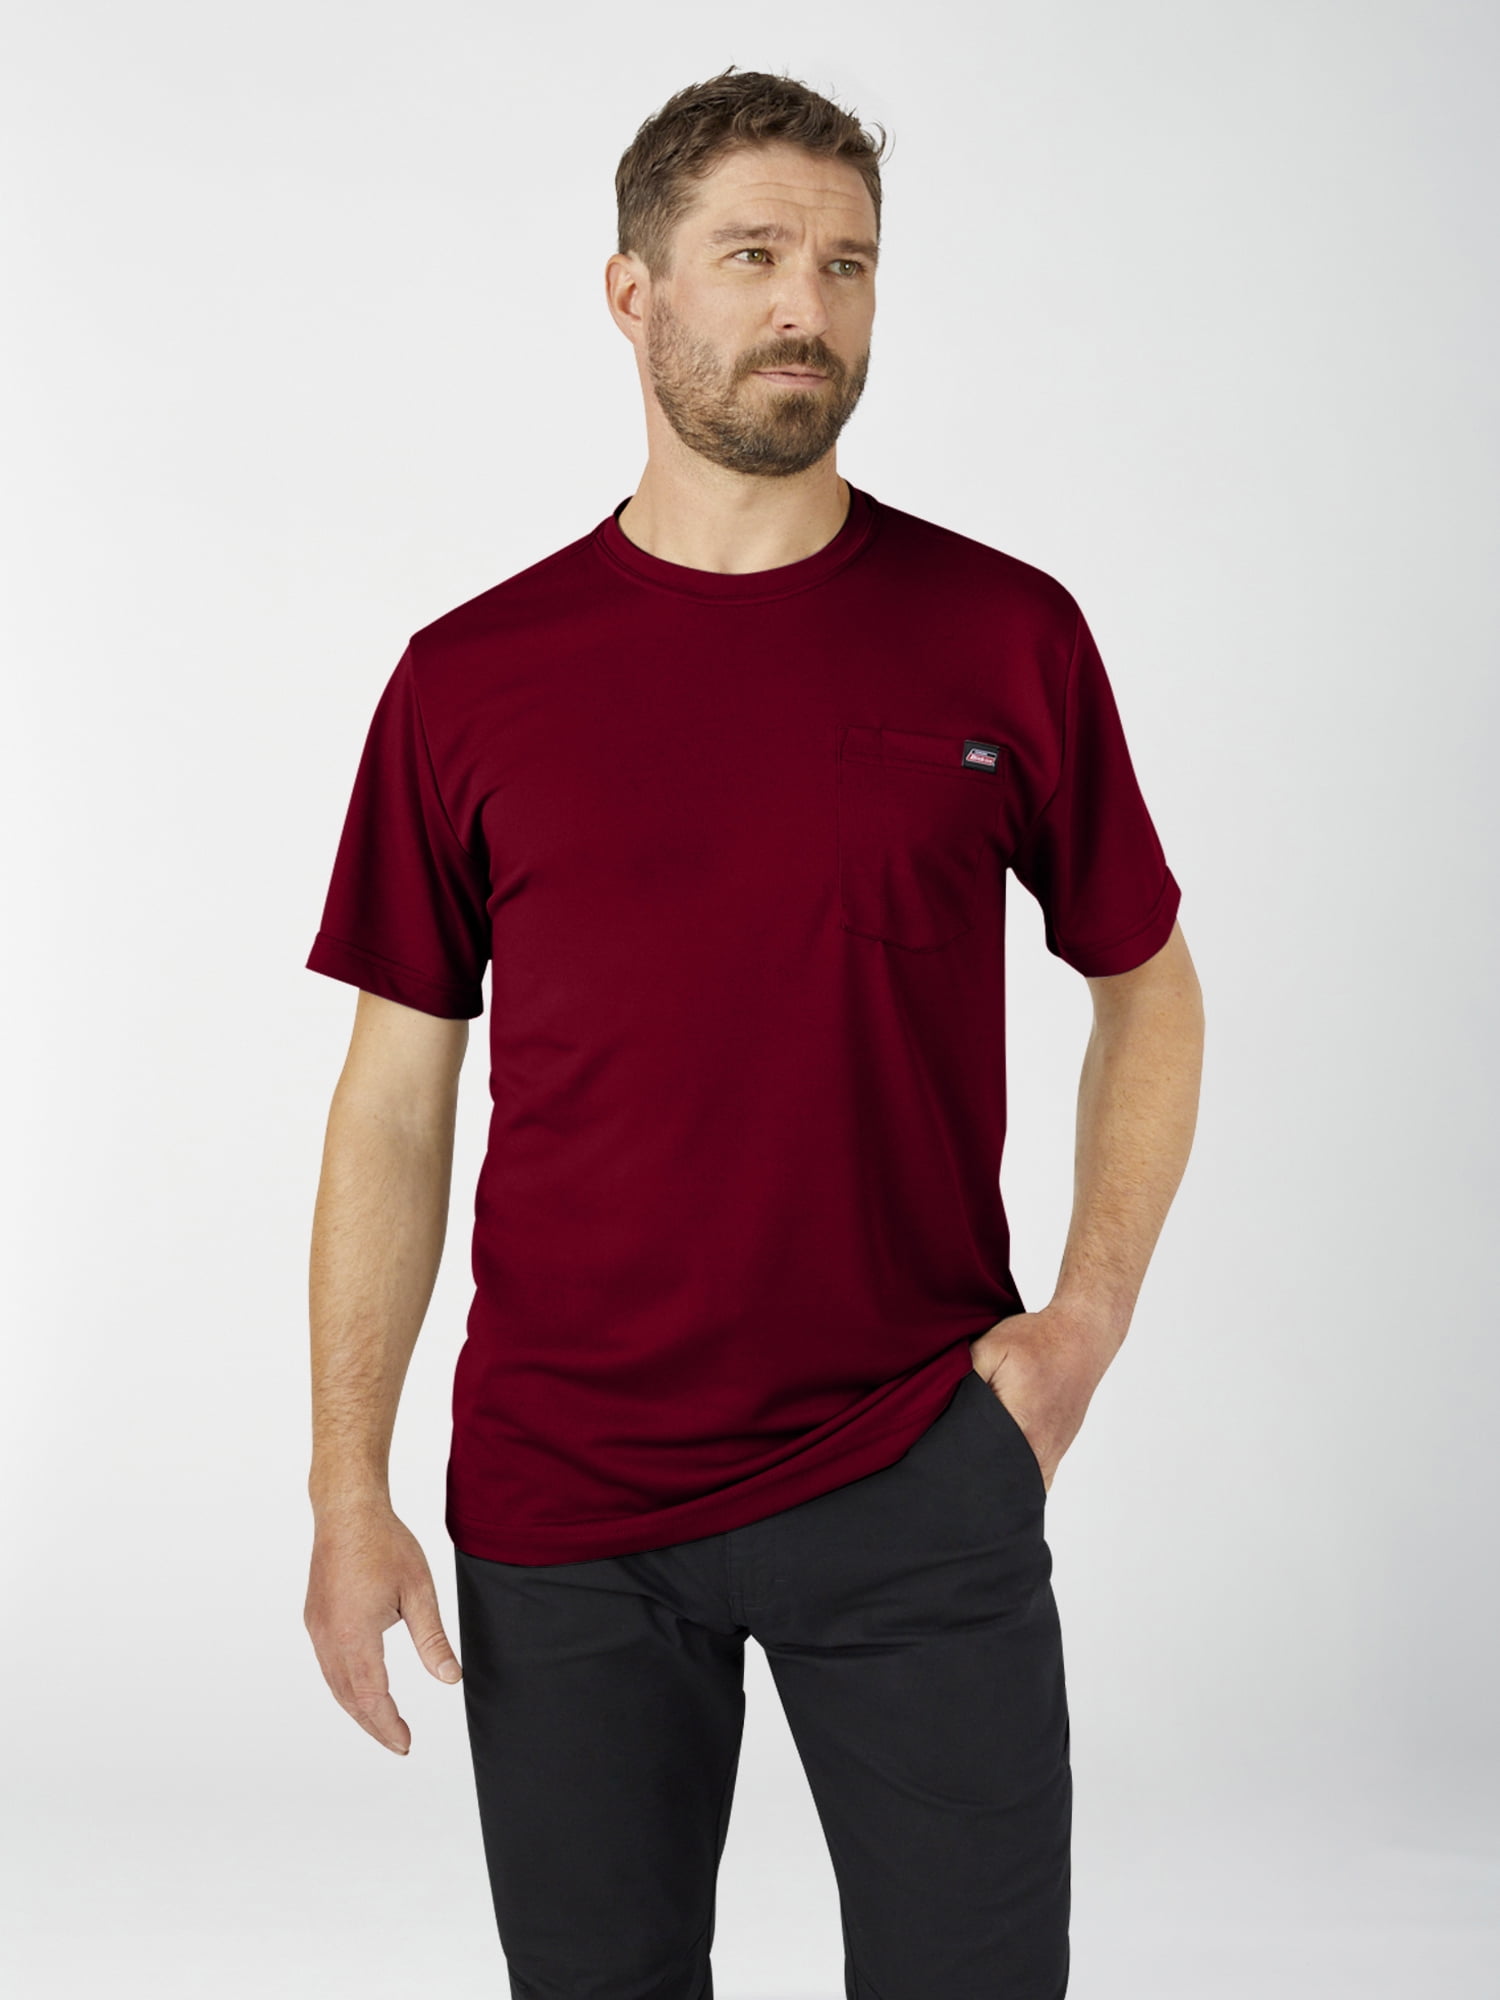 Polyester Performance Shirt Tee Men\'s Dickies Fit Relaxed Genuine